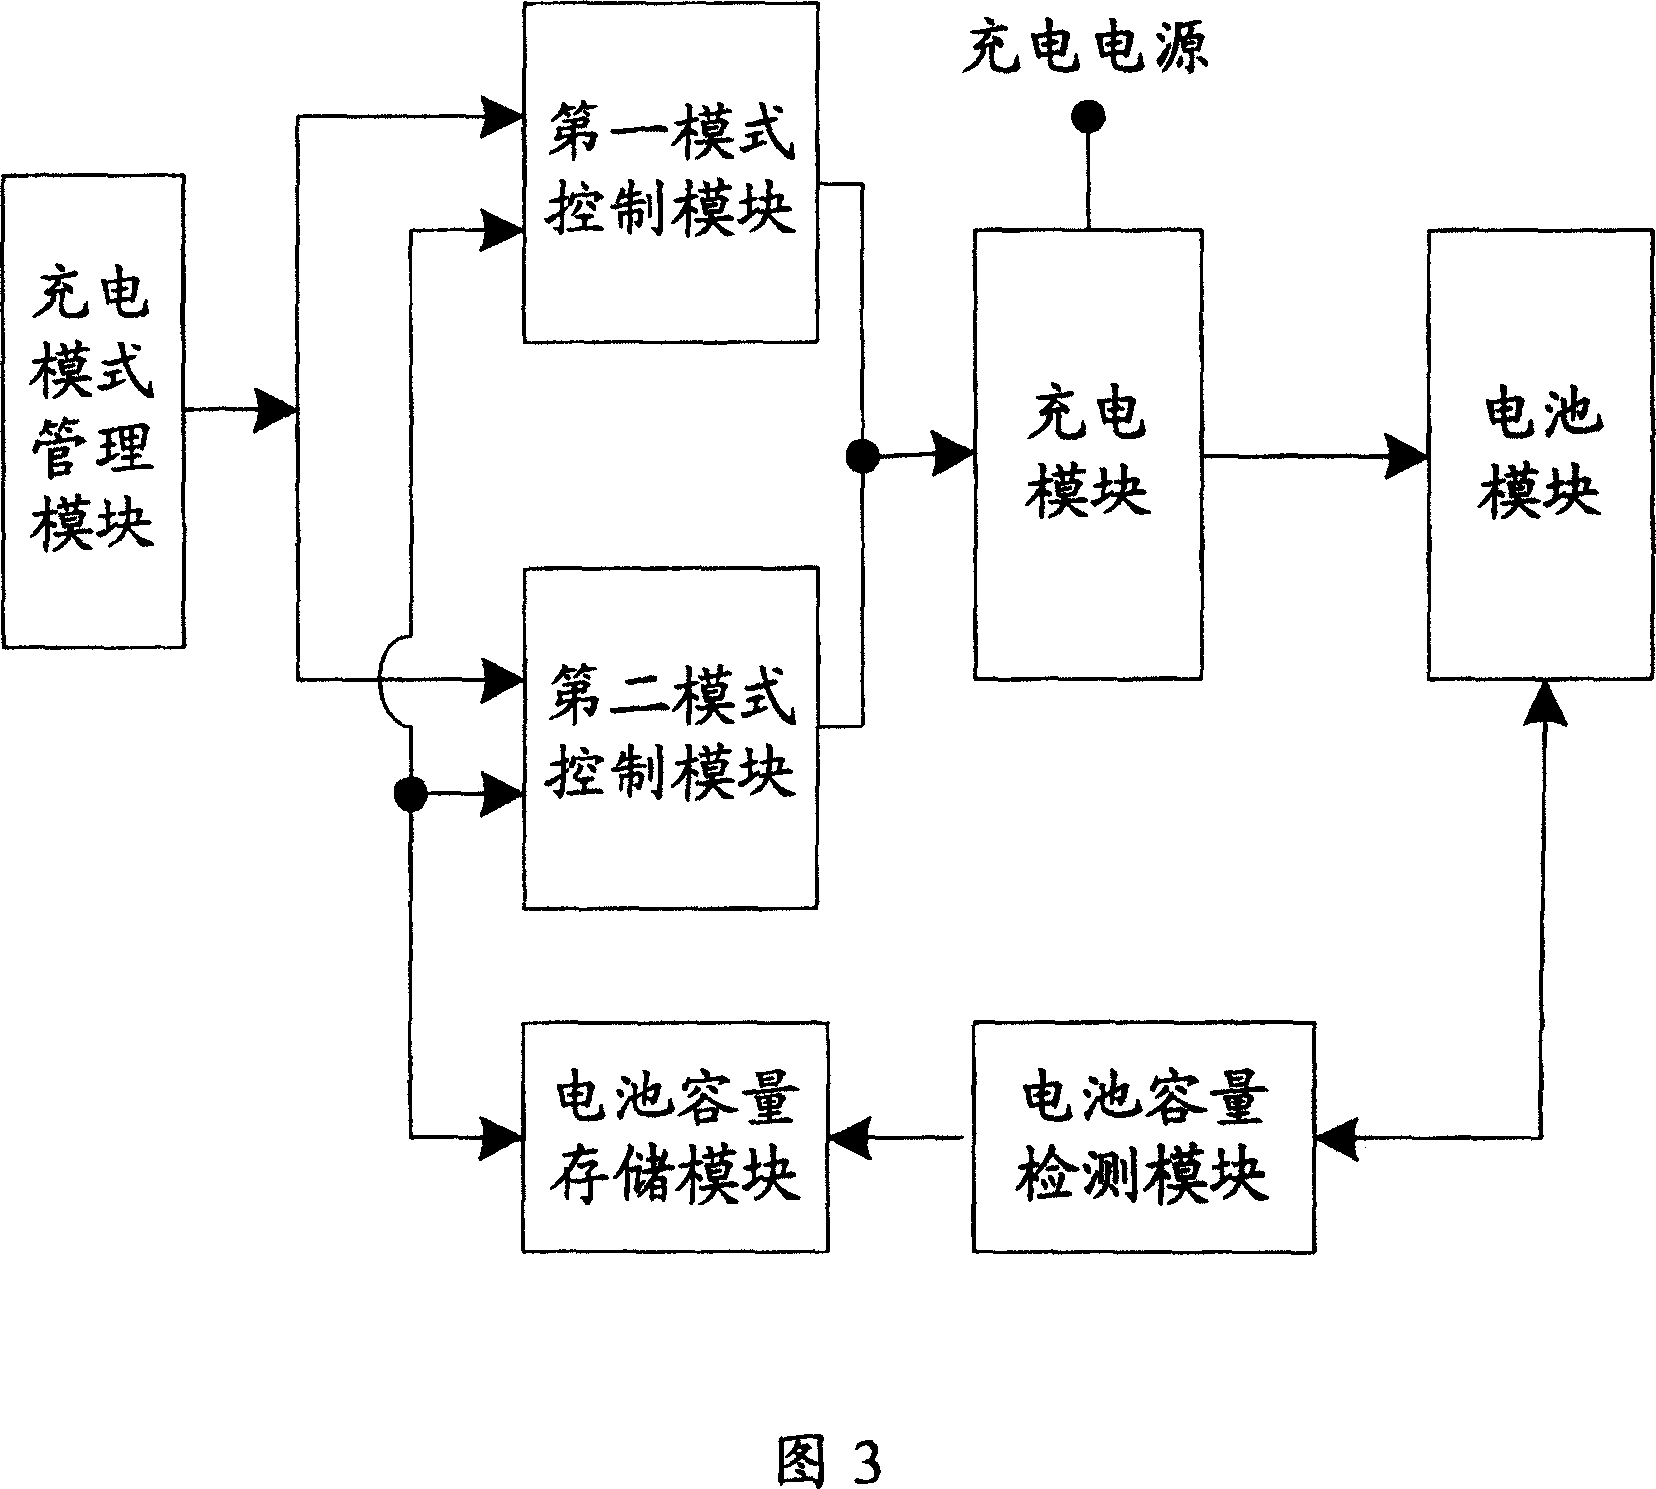 Method and system for charging control of lithium cell